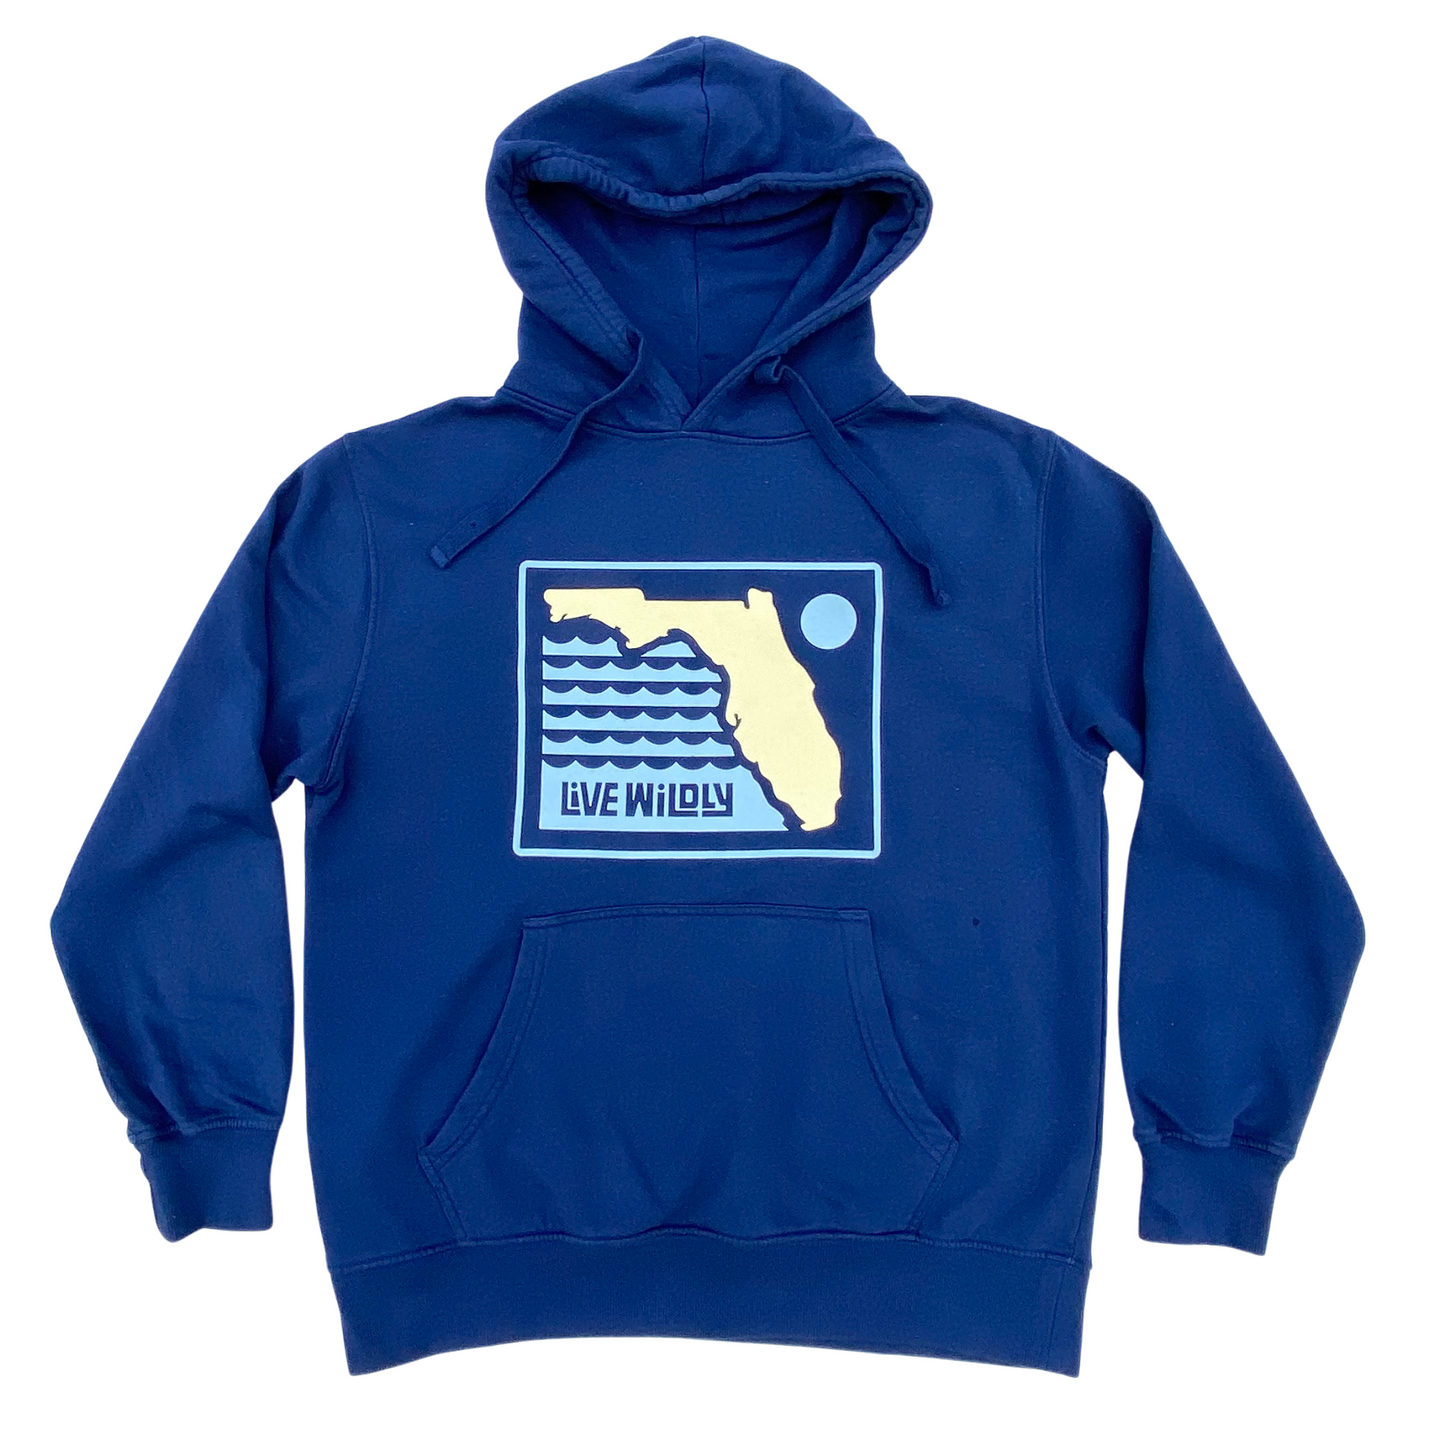 Live Wildly Florida Unisex Hoodie – Navy - Front - Laid Out - Live Wildly 